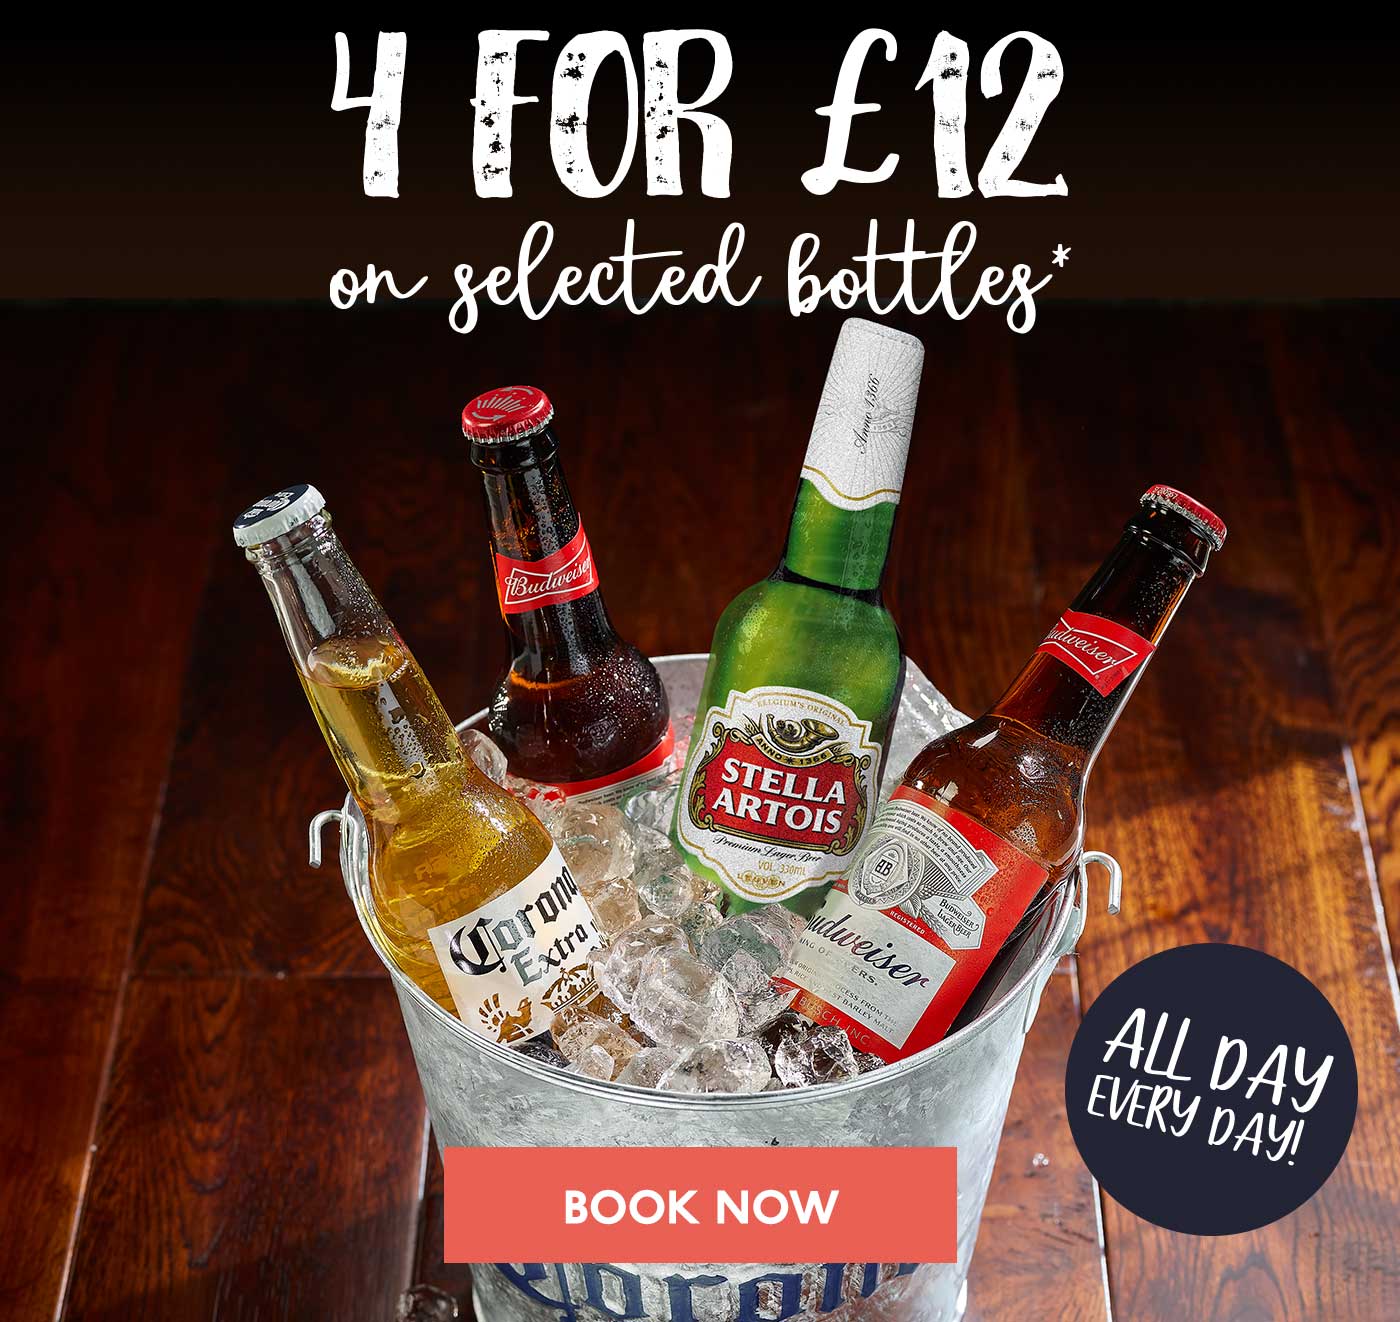 4 FOR £12  ON SELECTED BOTTLES*